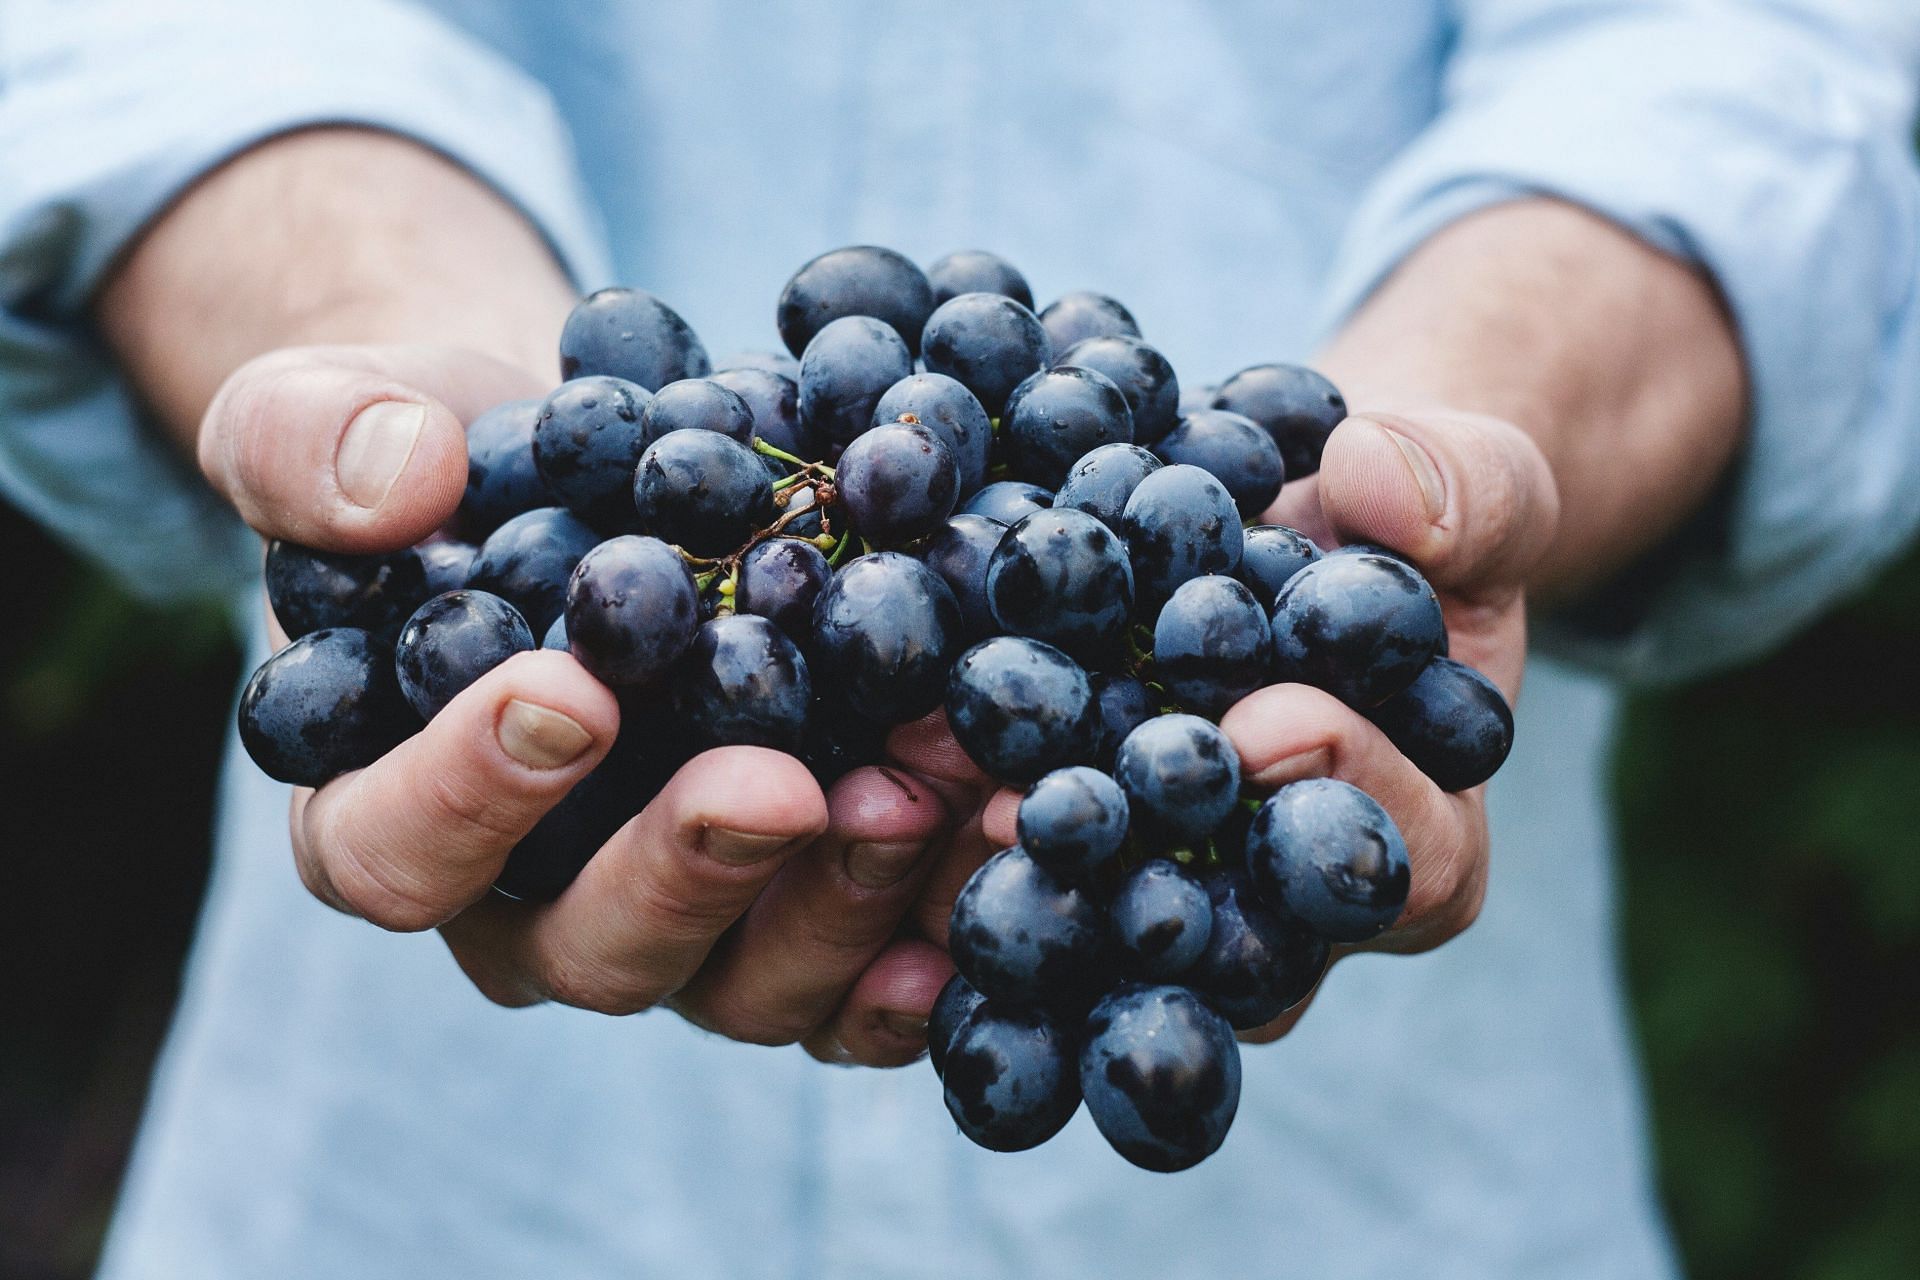 Drinking grape juice is healthy but not effective to fight a stomach bug (Image by Maja Petric/Unsplash)